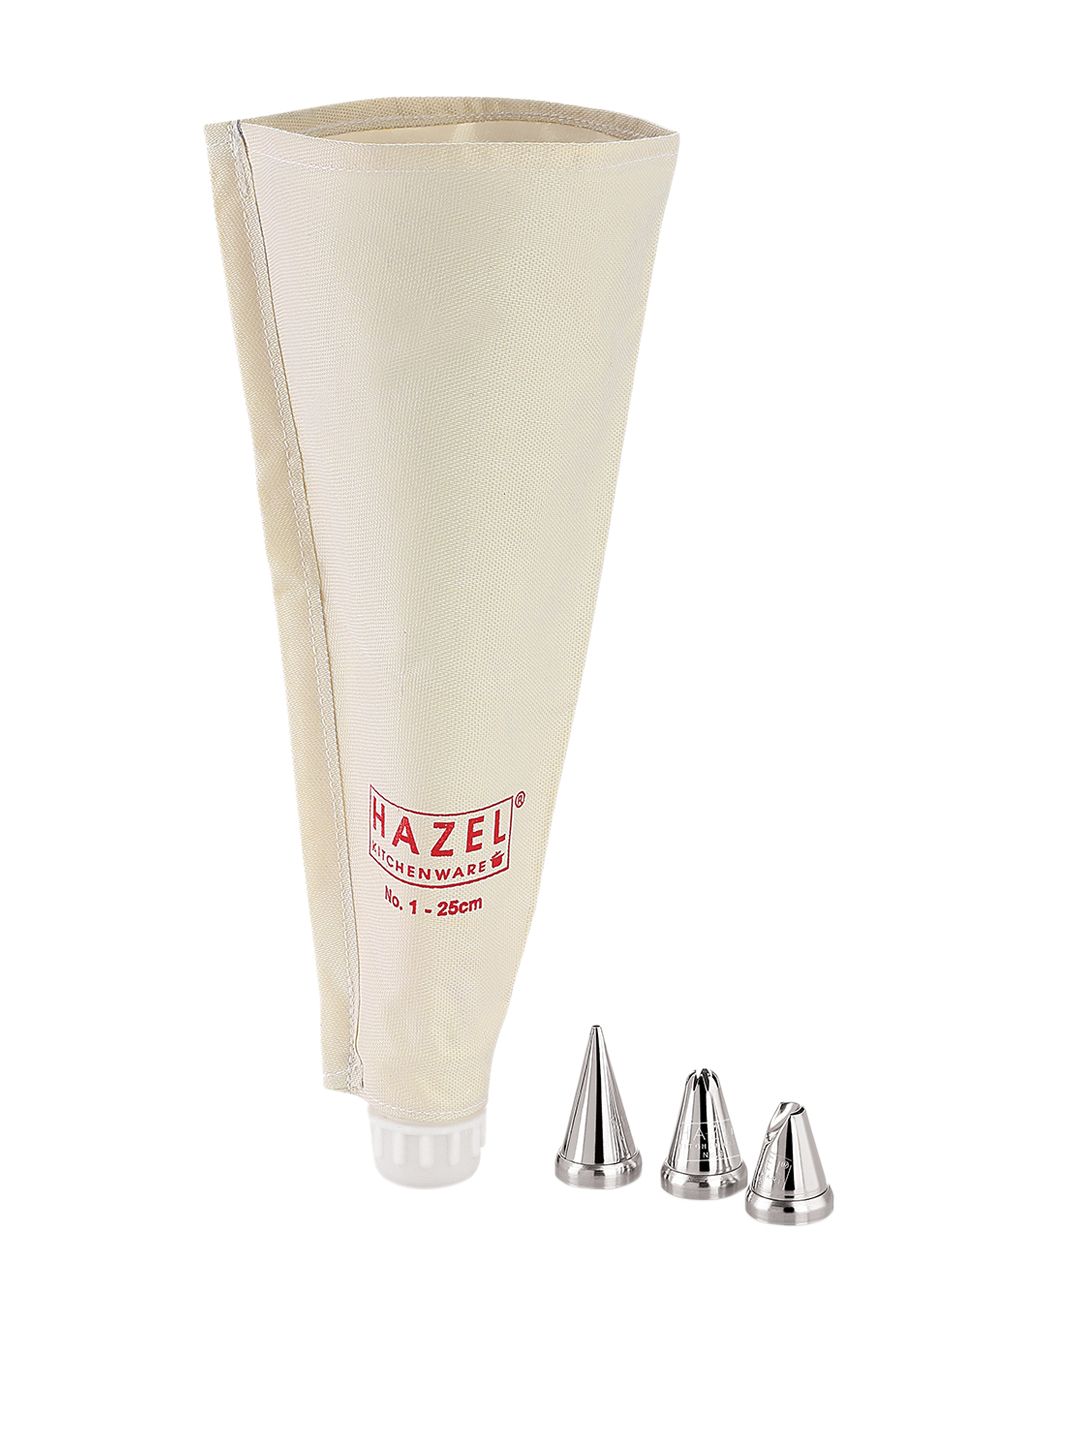 HAZEL Off-White & Silver-Toned Cotton Piping Bag With 3 Nozzles Price in India